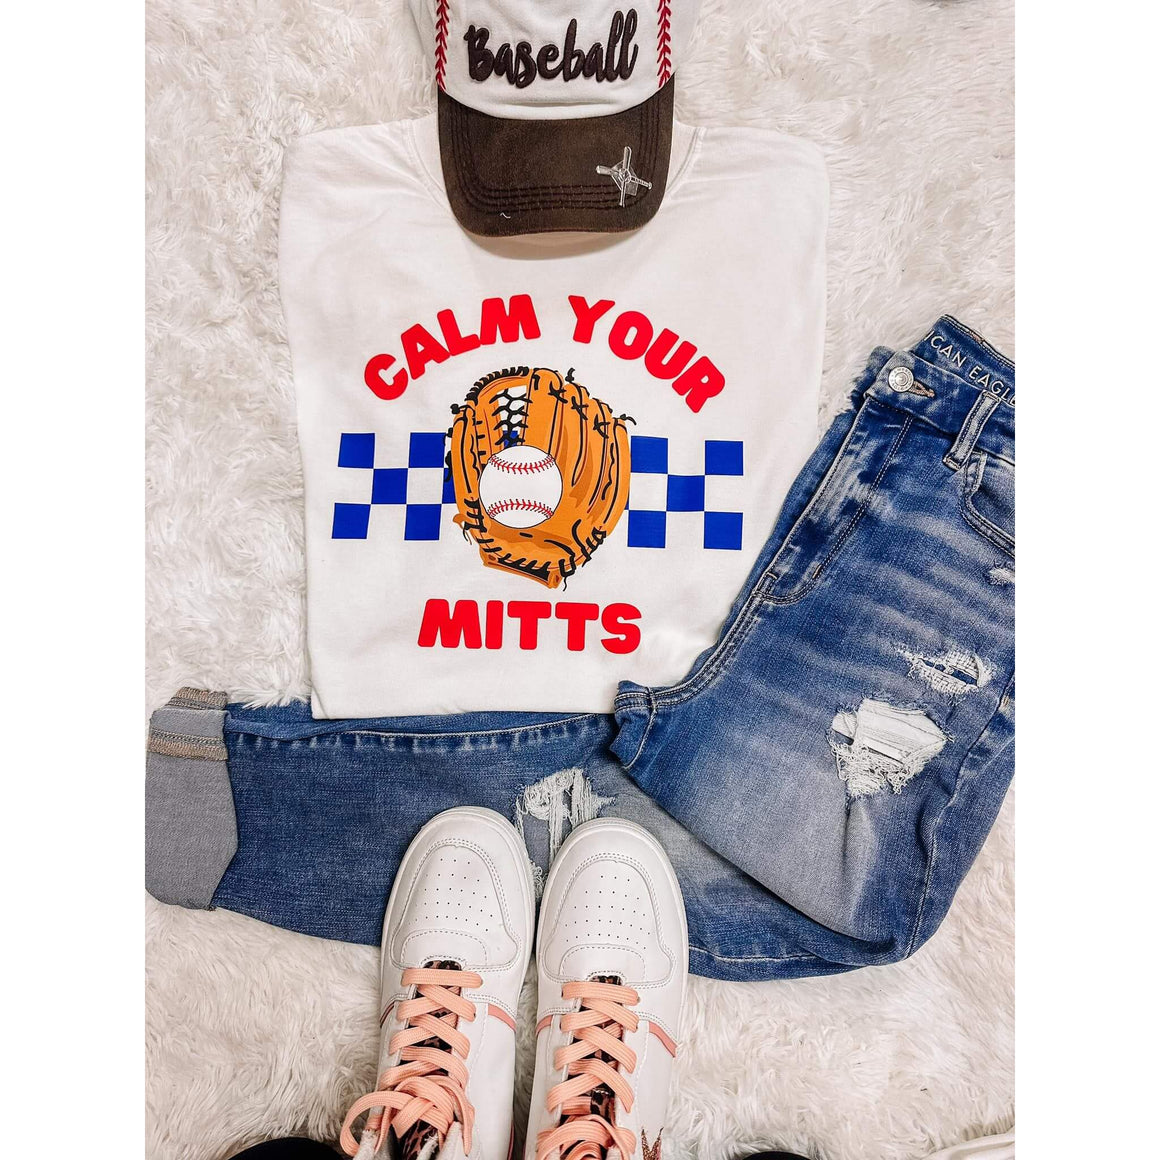 Calm your Mitts Baseball Graphic Tee